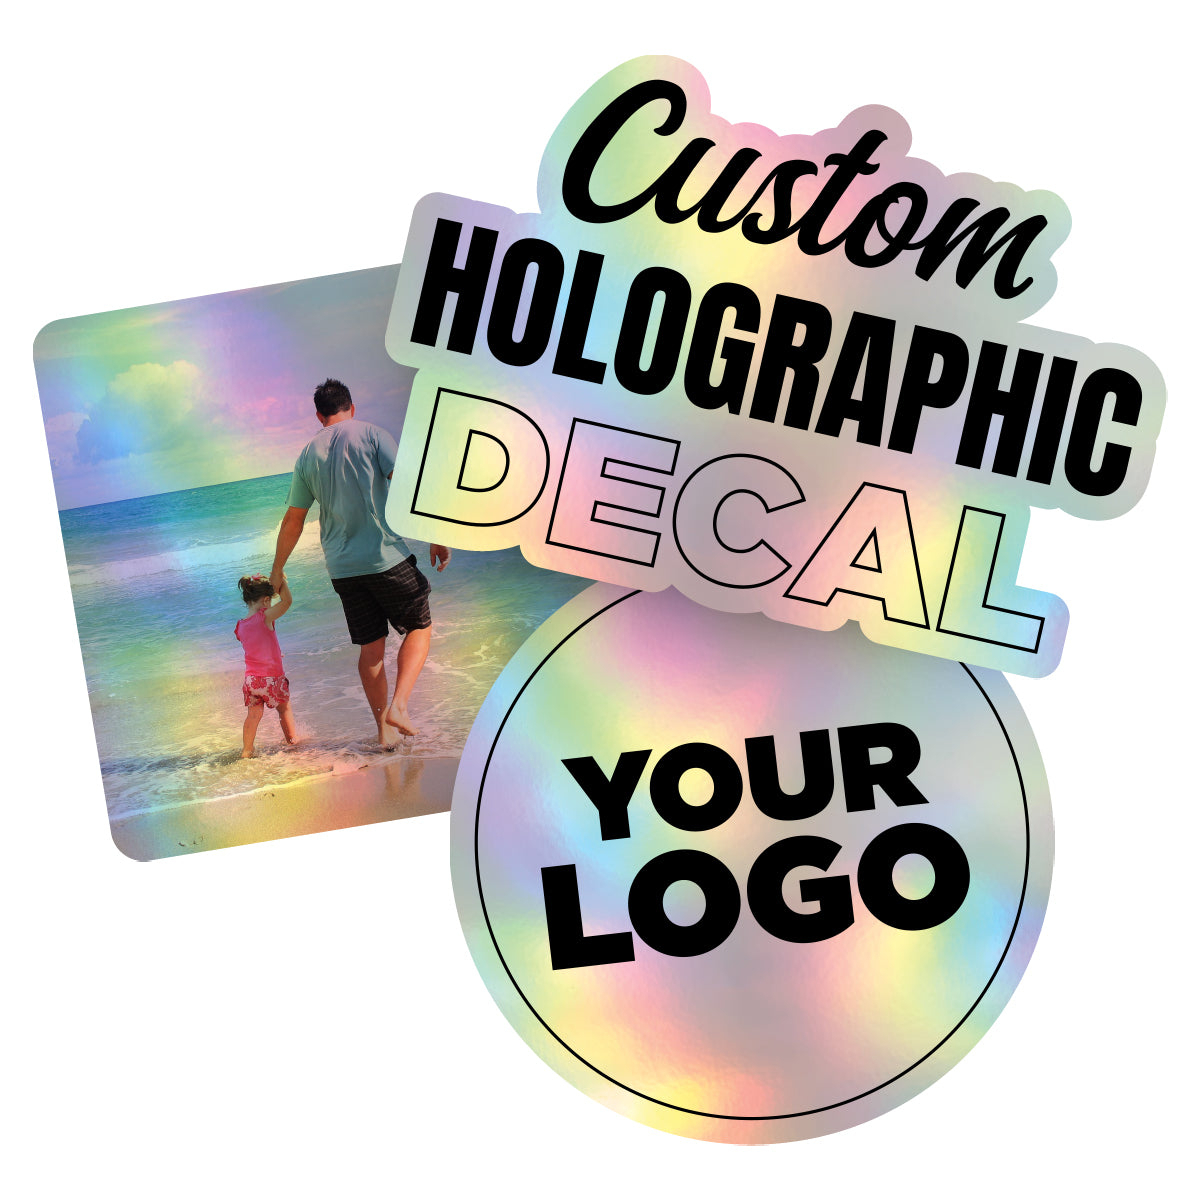 Personalized Holographic Vinyl Sticker Decal Custom Made Any Logo, Image, Text, Or Name Die Cut To Shape - 50 Pack, 8 Inch, Circle